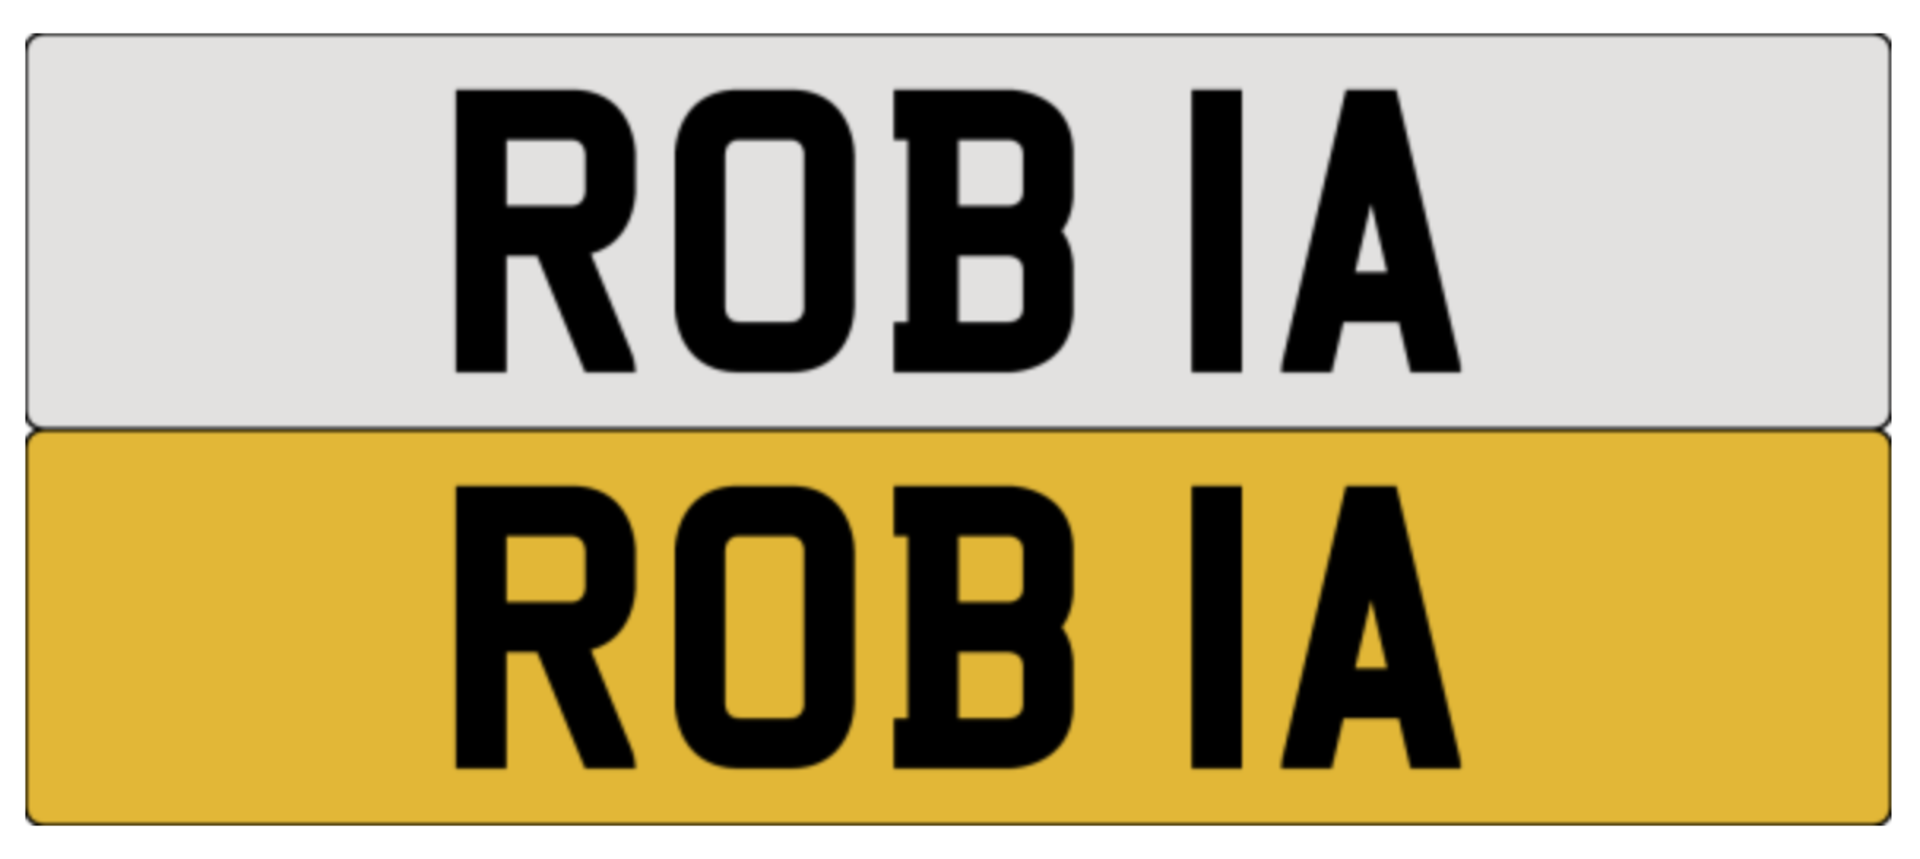 On DVLA retention, ready to transfer ROB 1A .- Please note, VAT applies on the hammer.